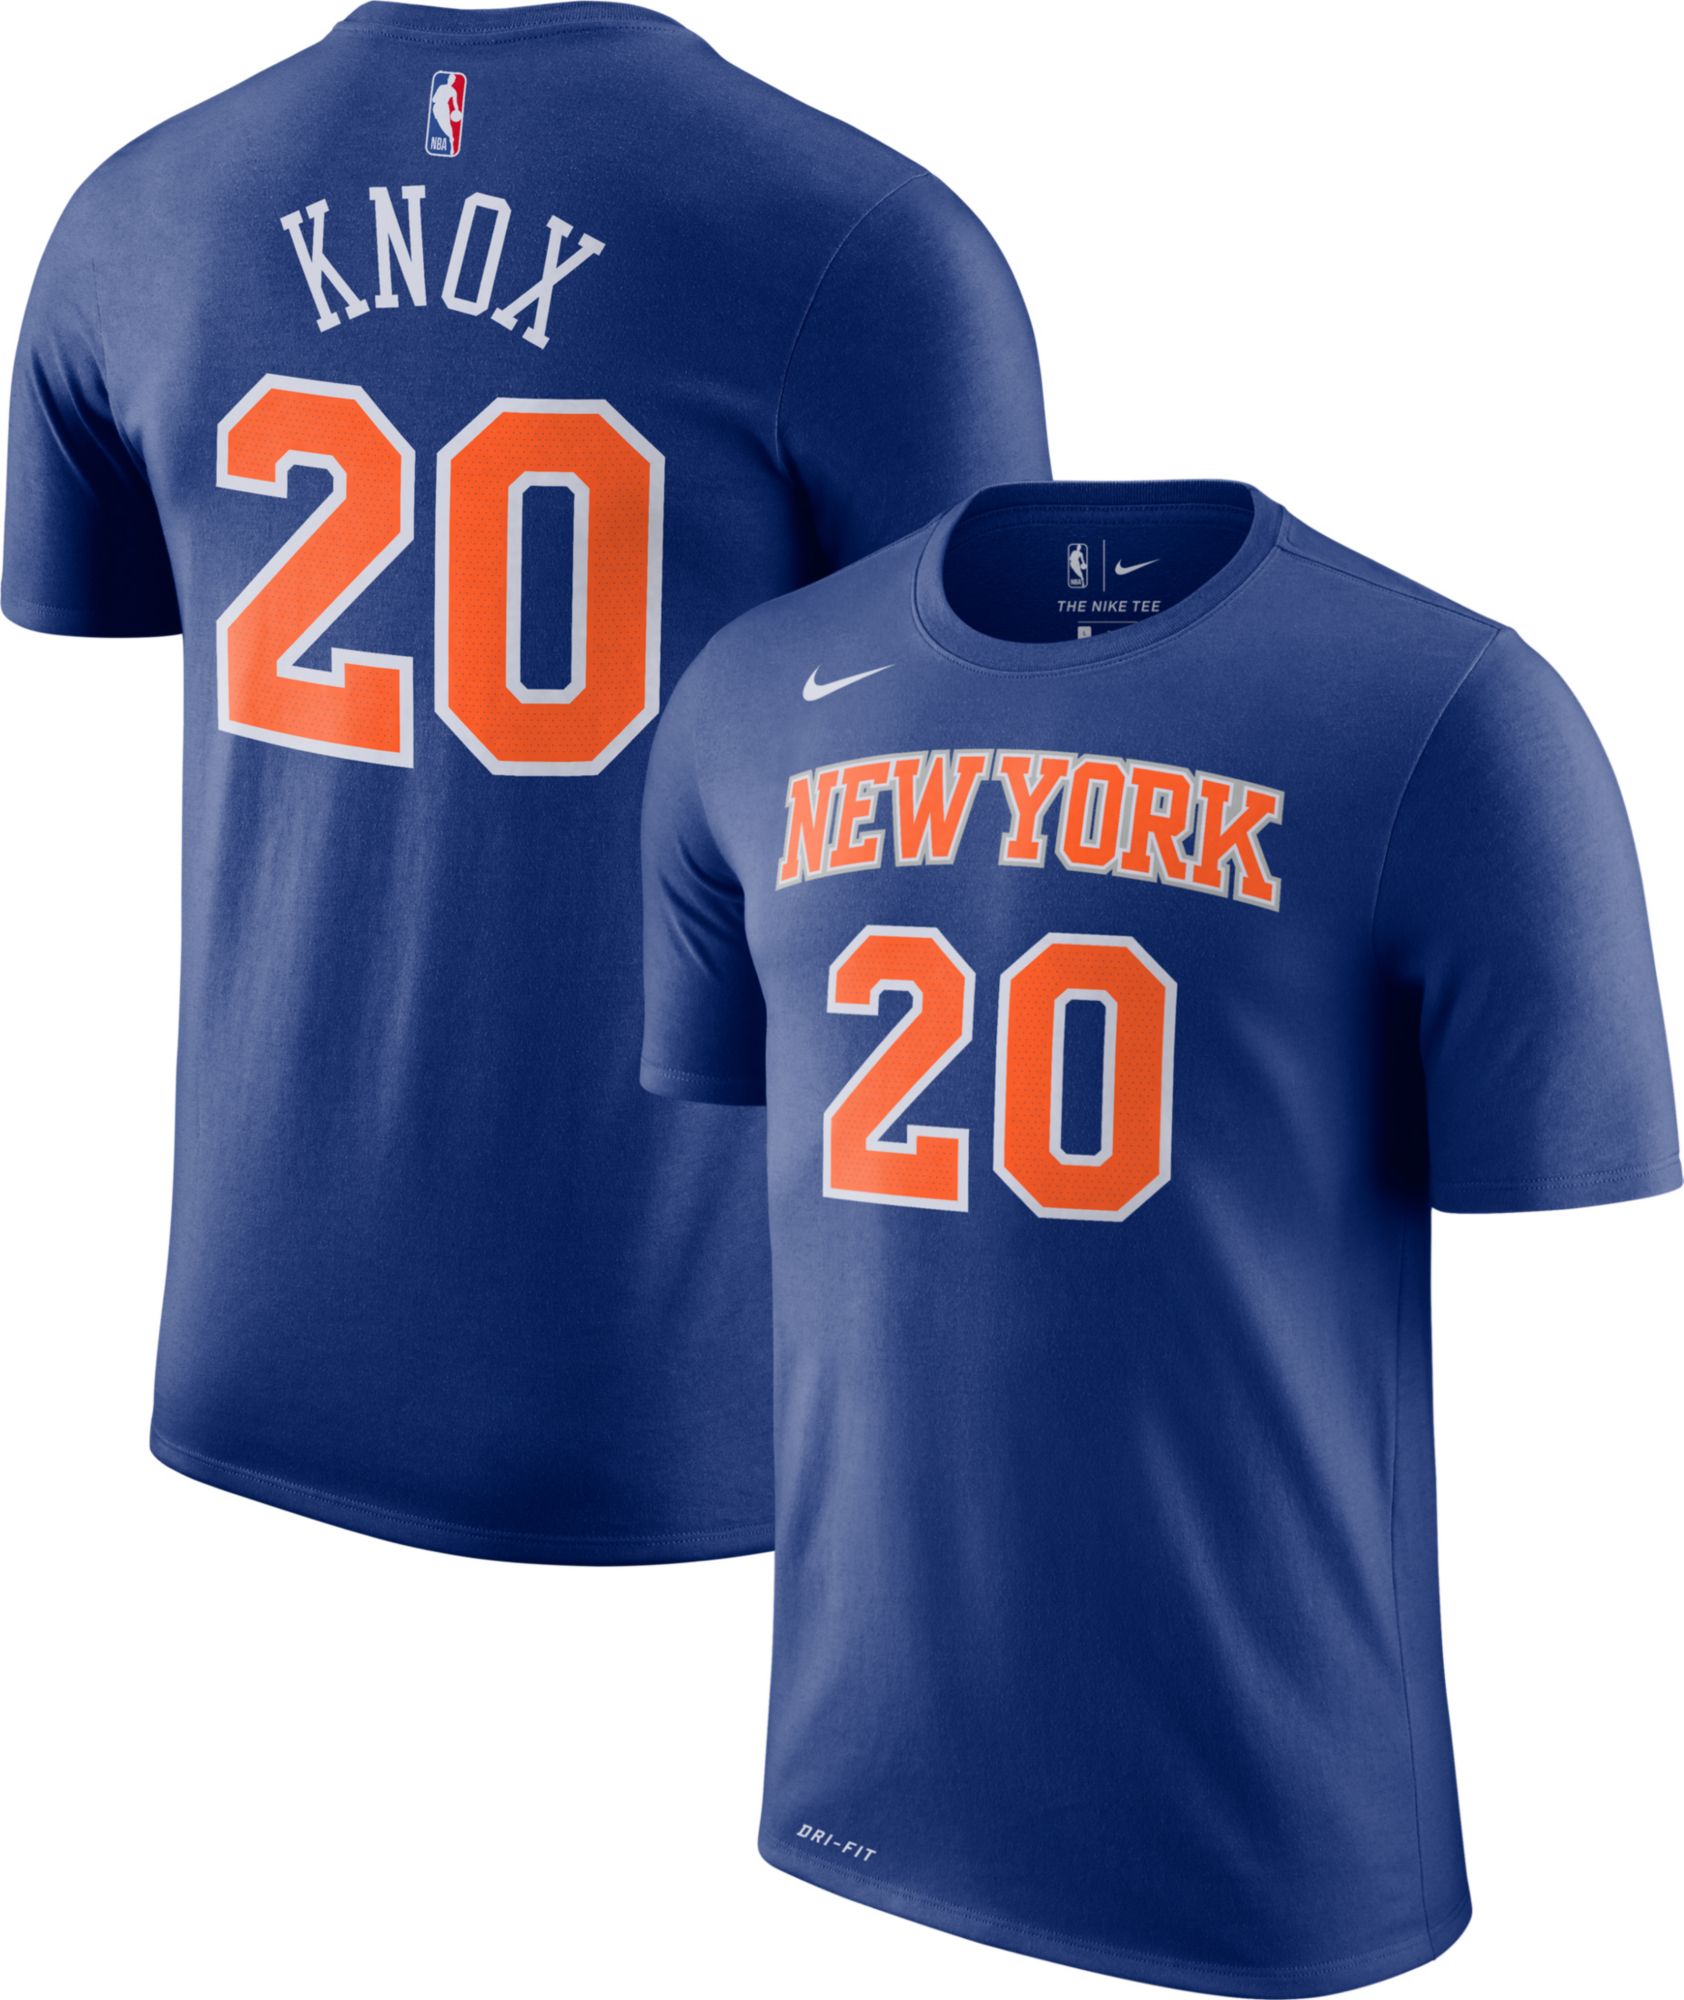 kevin knox youth jersey